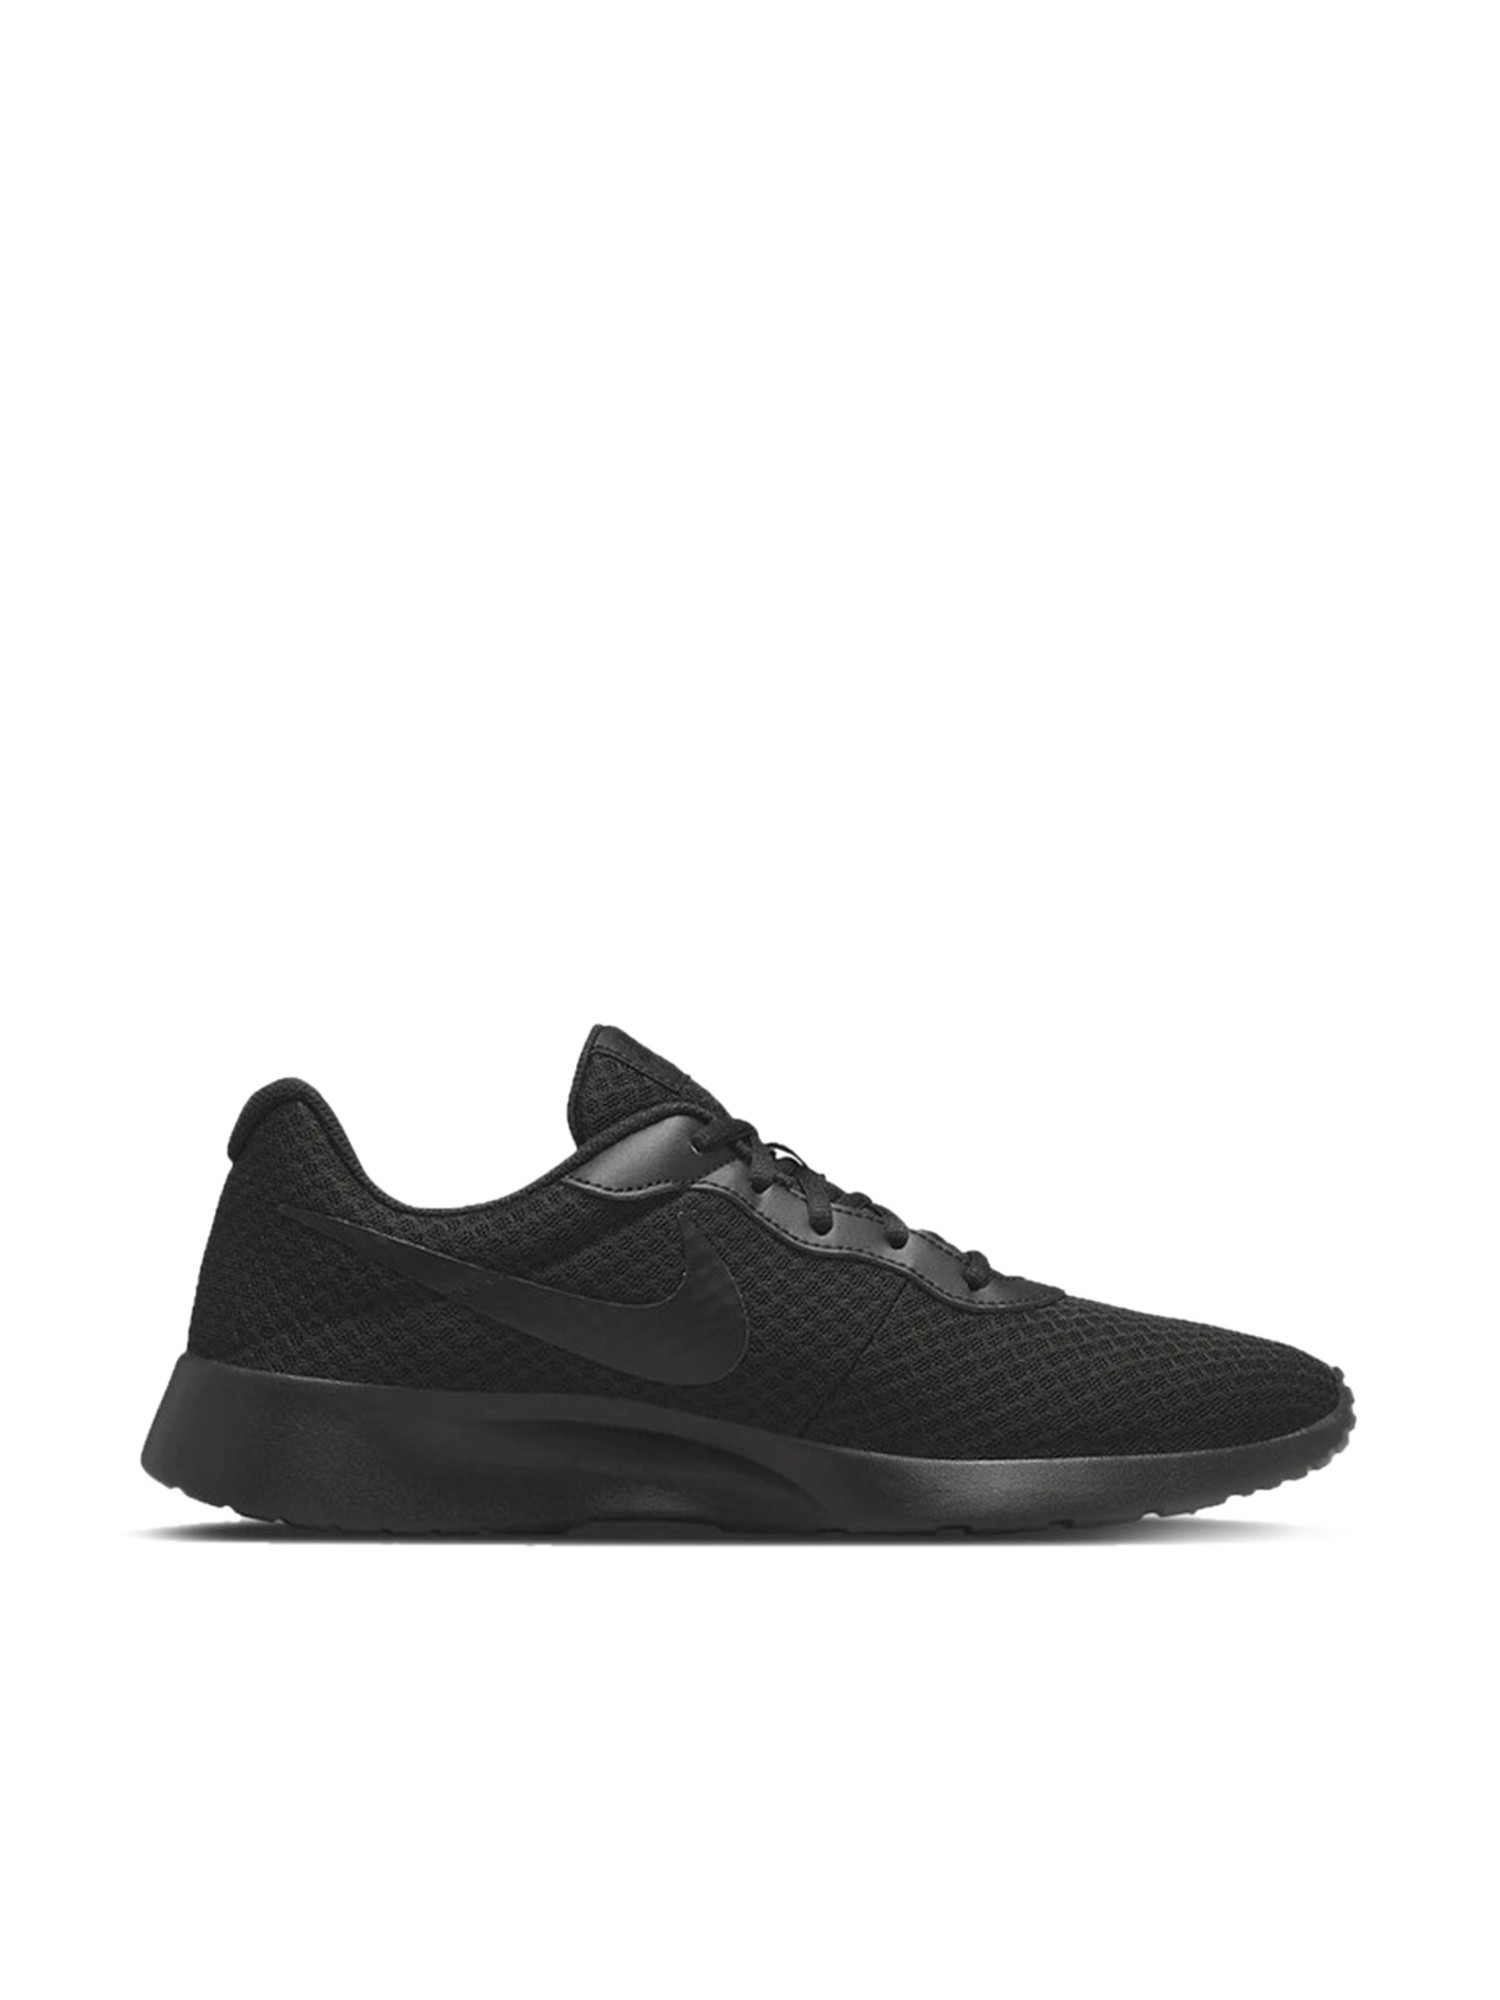 Buy Running Shoes For Men: Mike-N-Blk-Golden | Campus Shoes